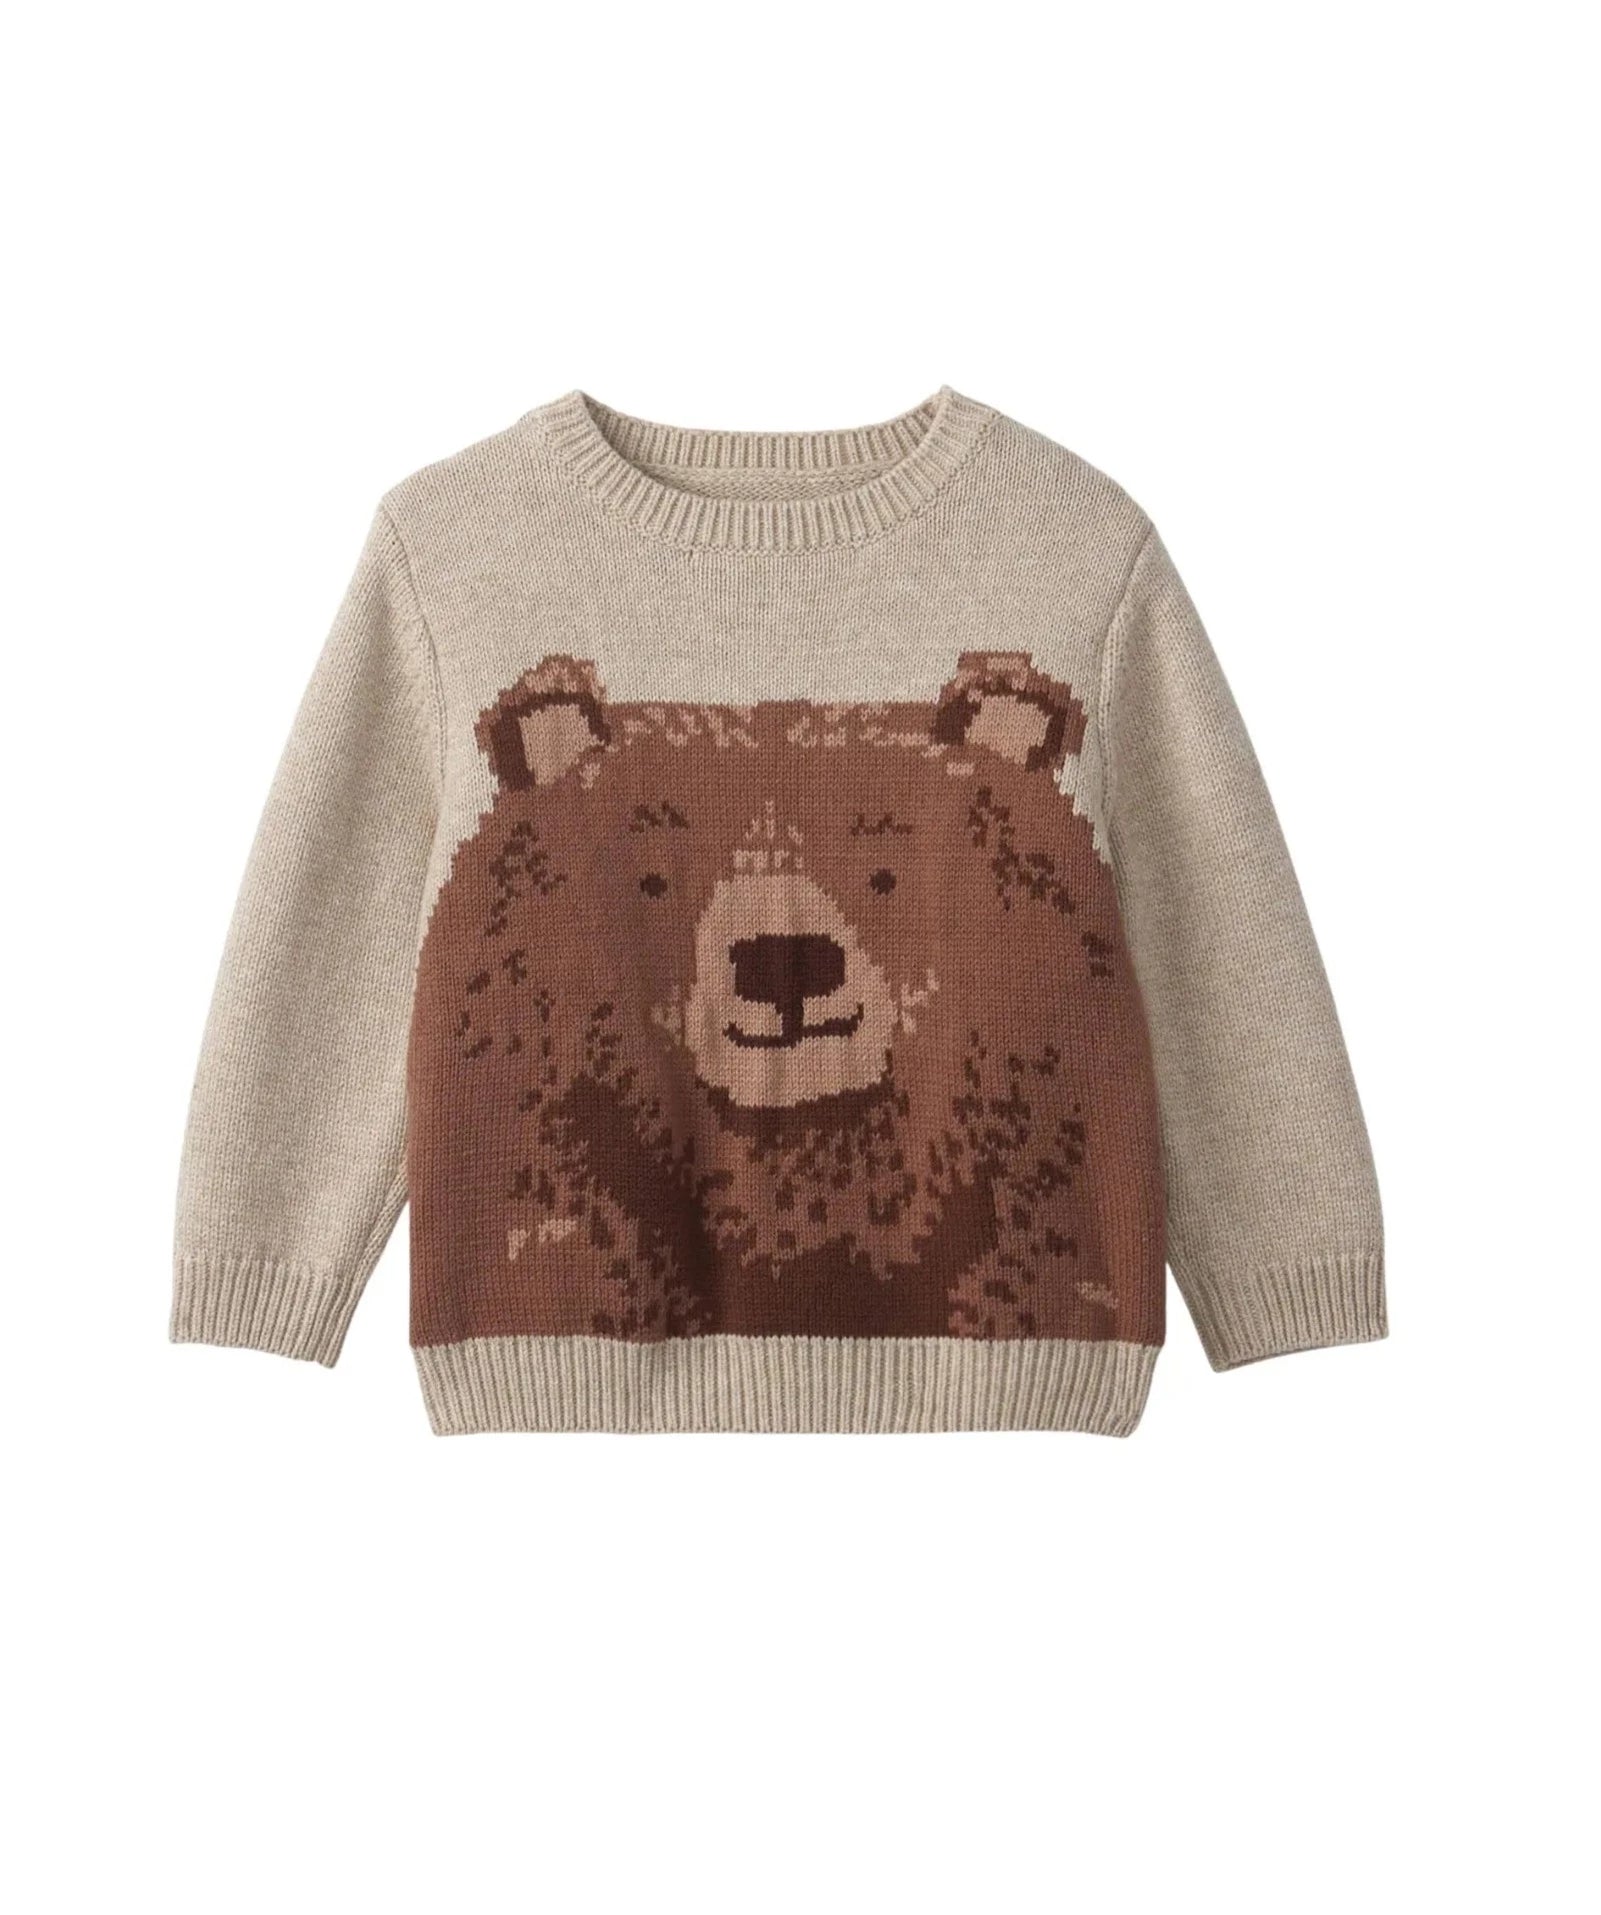 long sleeve cream sweater with large brown bear face smiling on front